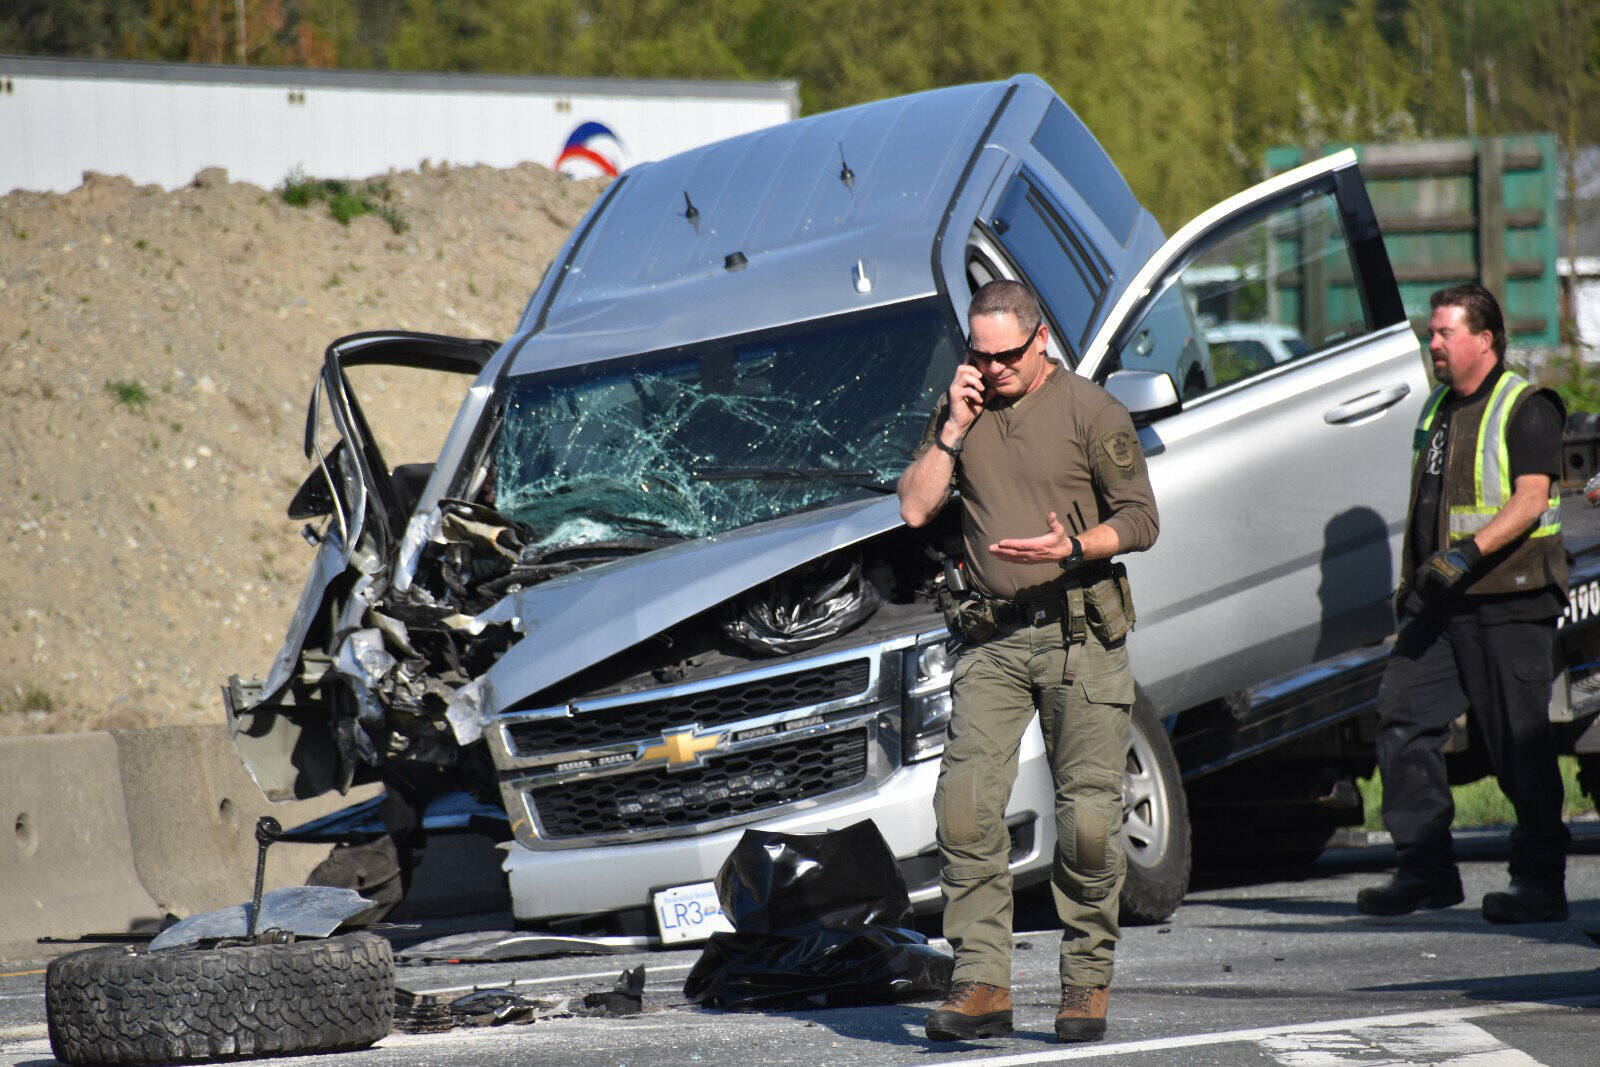 A member of the RCMP’s ERT team talks on the phone after an officer’s vehicle crashed into a dump truck on Highway 1 en route to a weapons call in Chilliwack on May 3, 2023. (Curtis Kreklau photo)